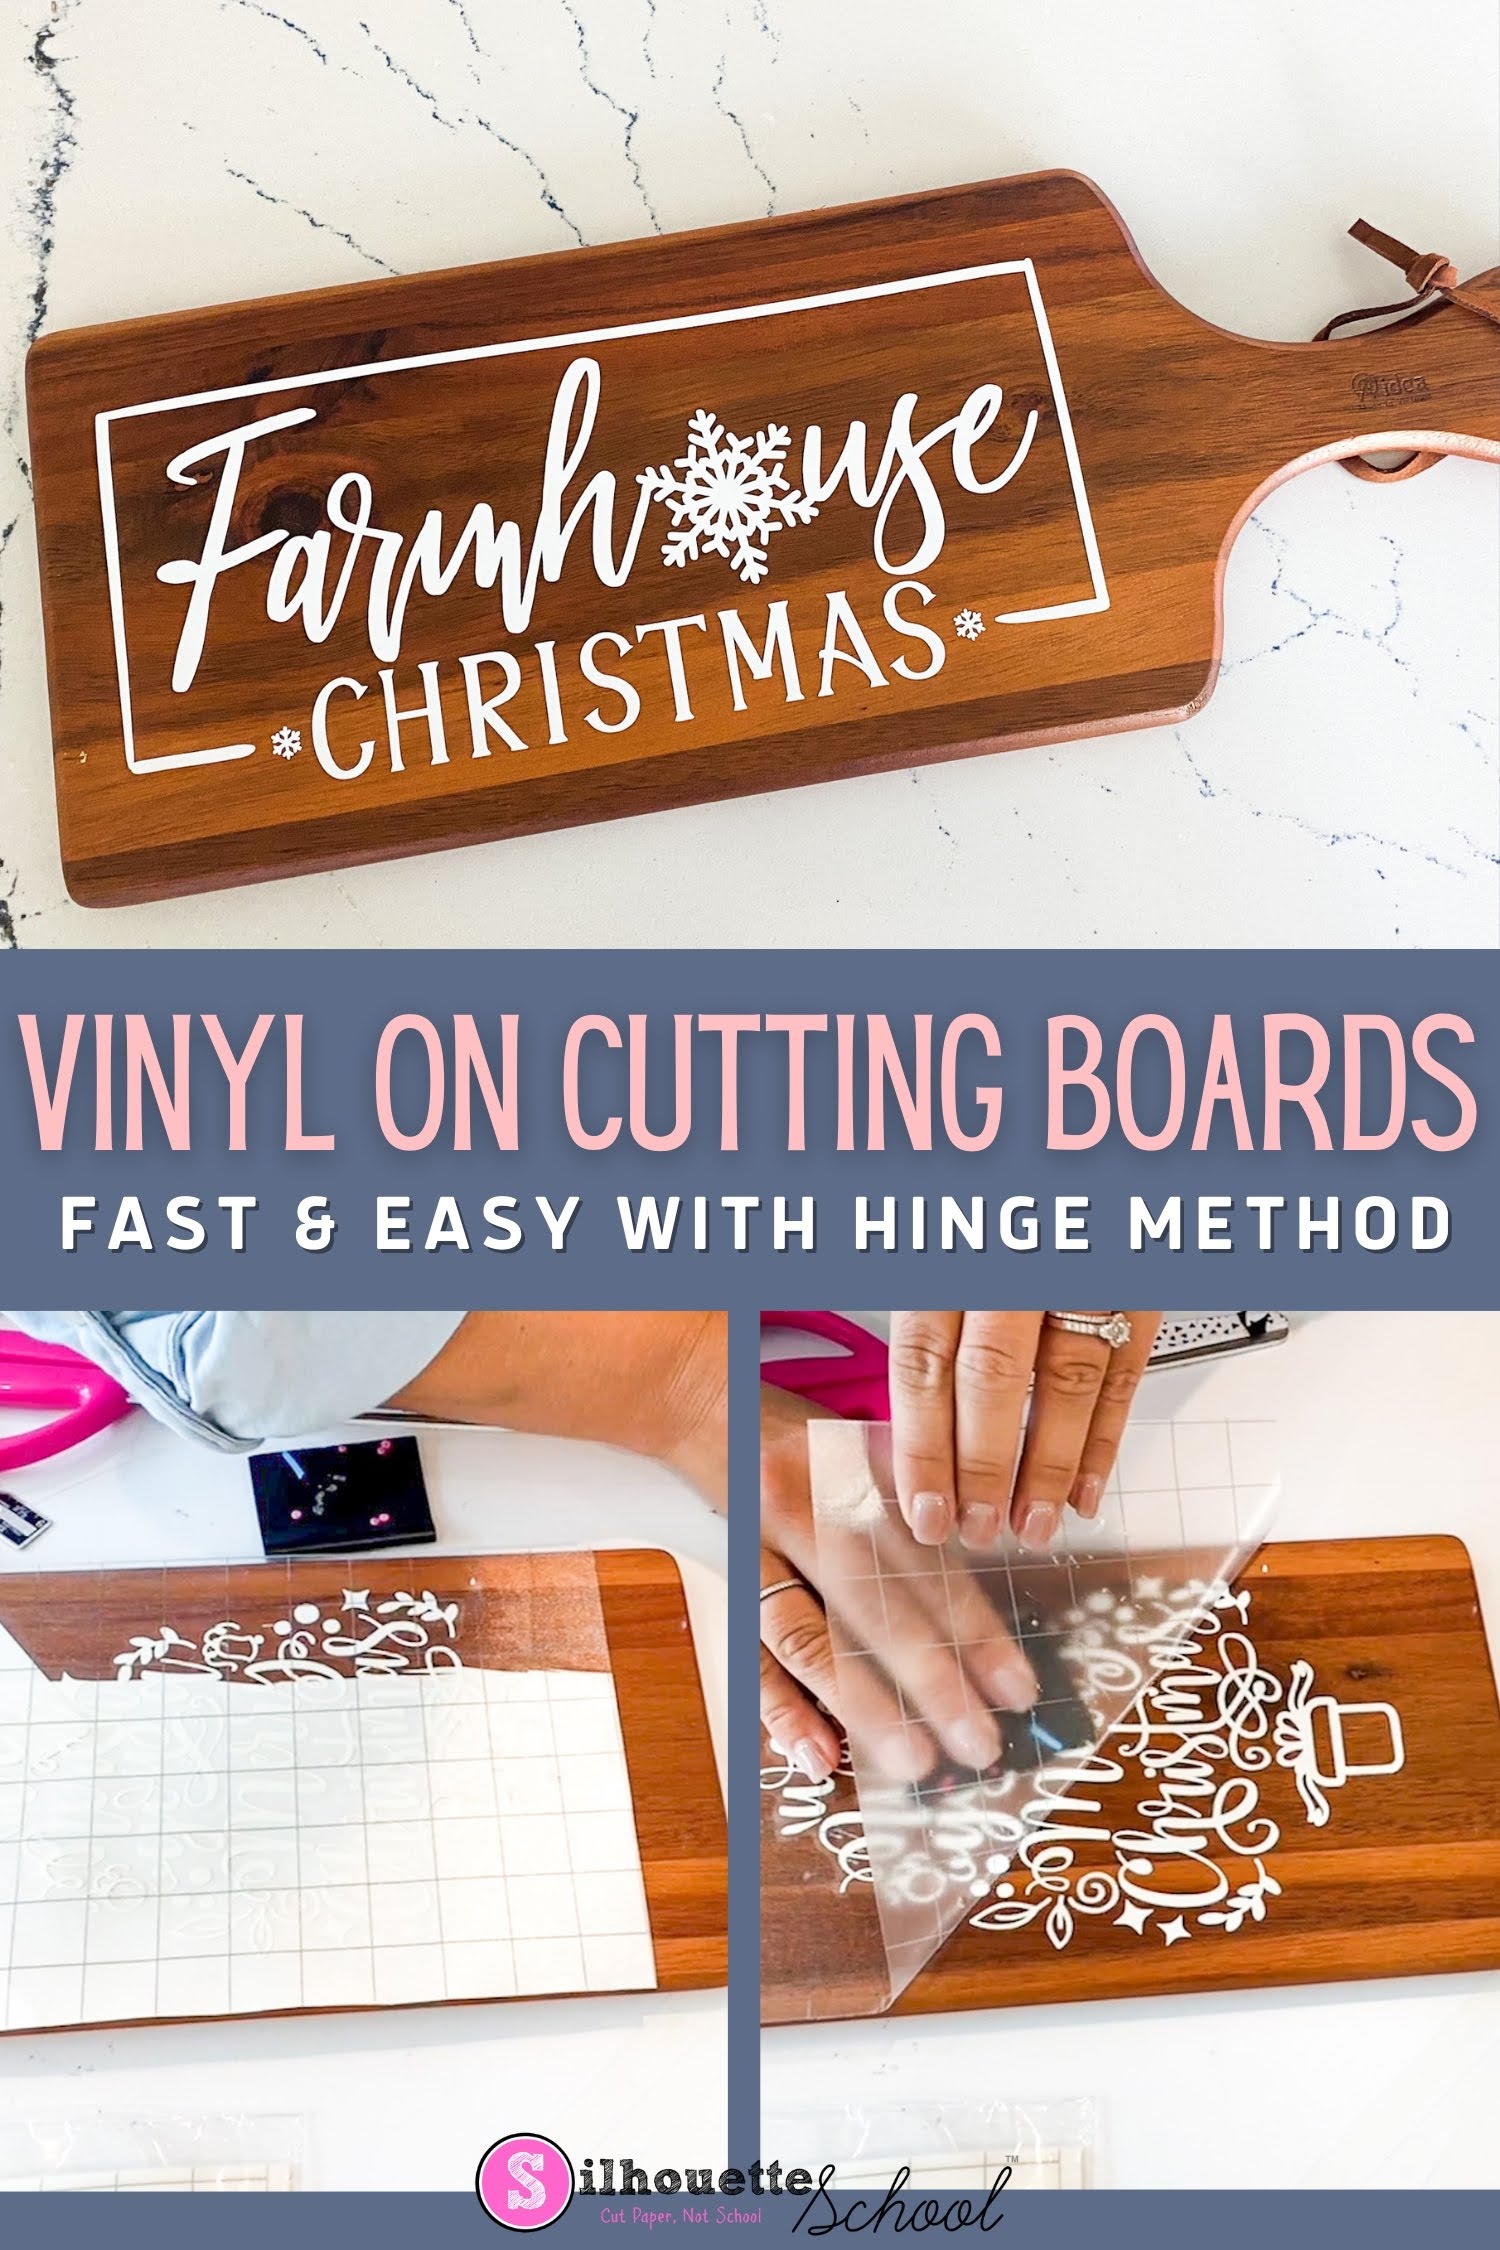 HOW TO GET VINYL TO STICK TO WOOD 